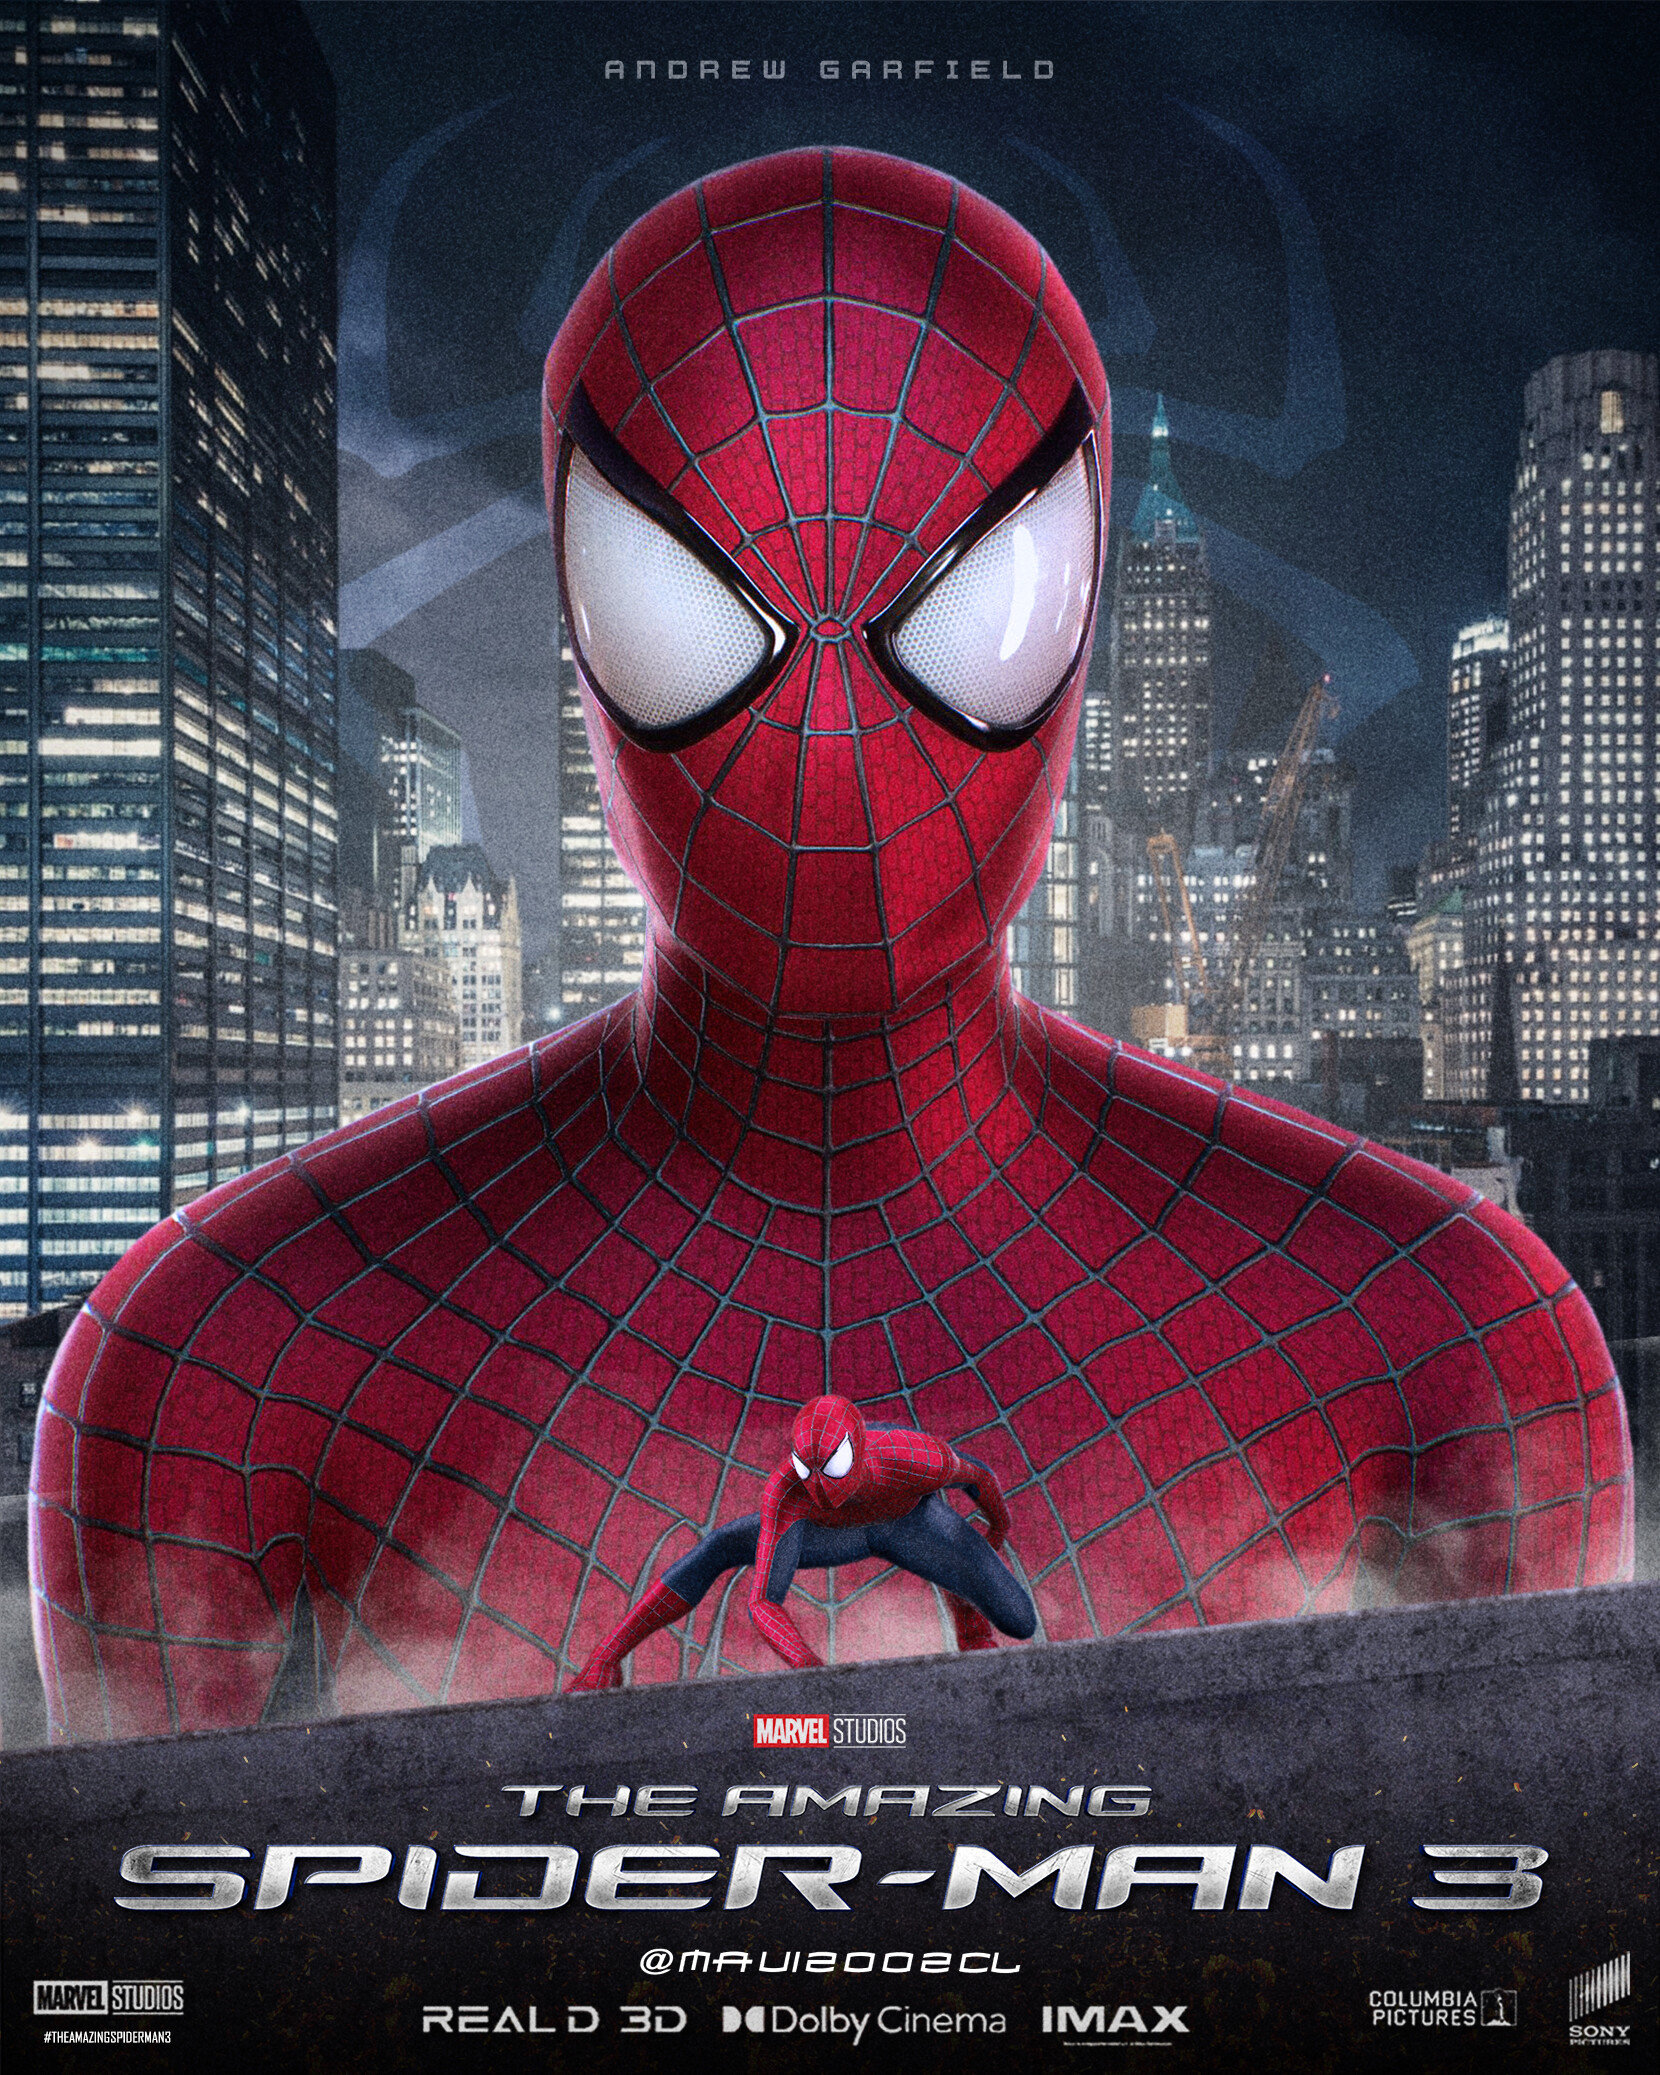 Another poster I made for The Amazing Spider-Man 3 and the